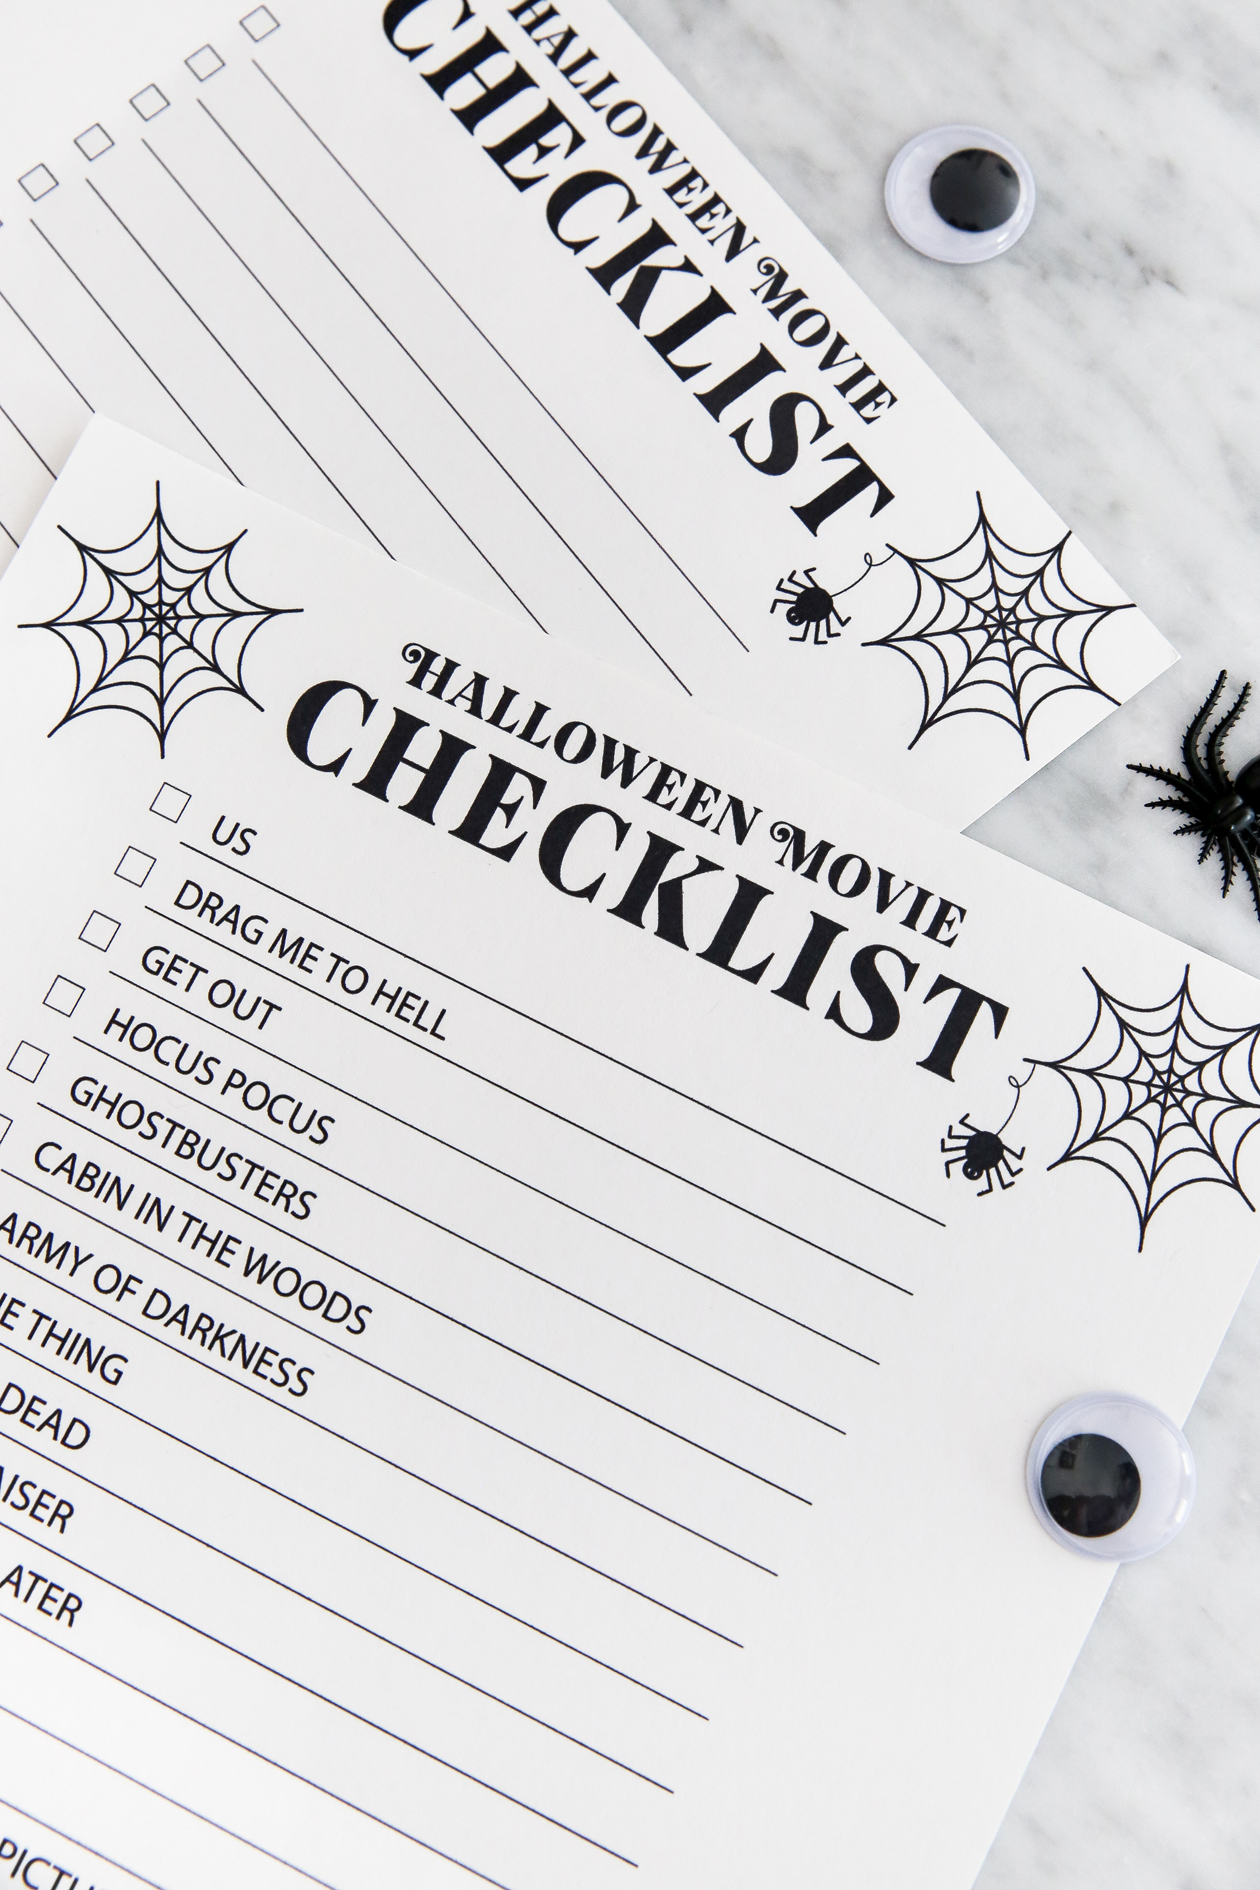 Watch all the spooky movies this fall with this Halloween Movie Checklist Printable! Just download and print at home for free!